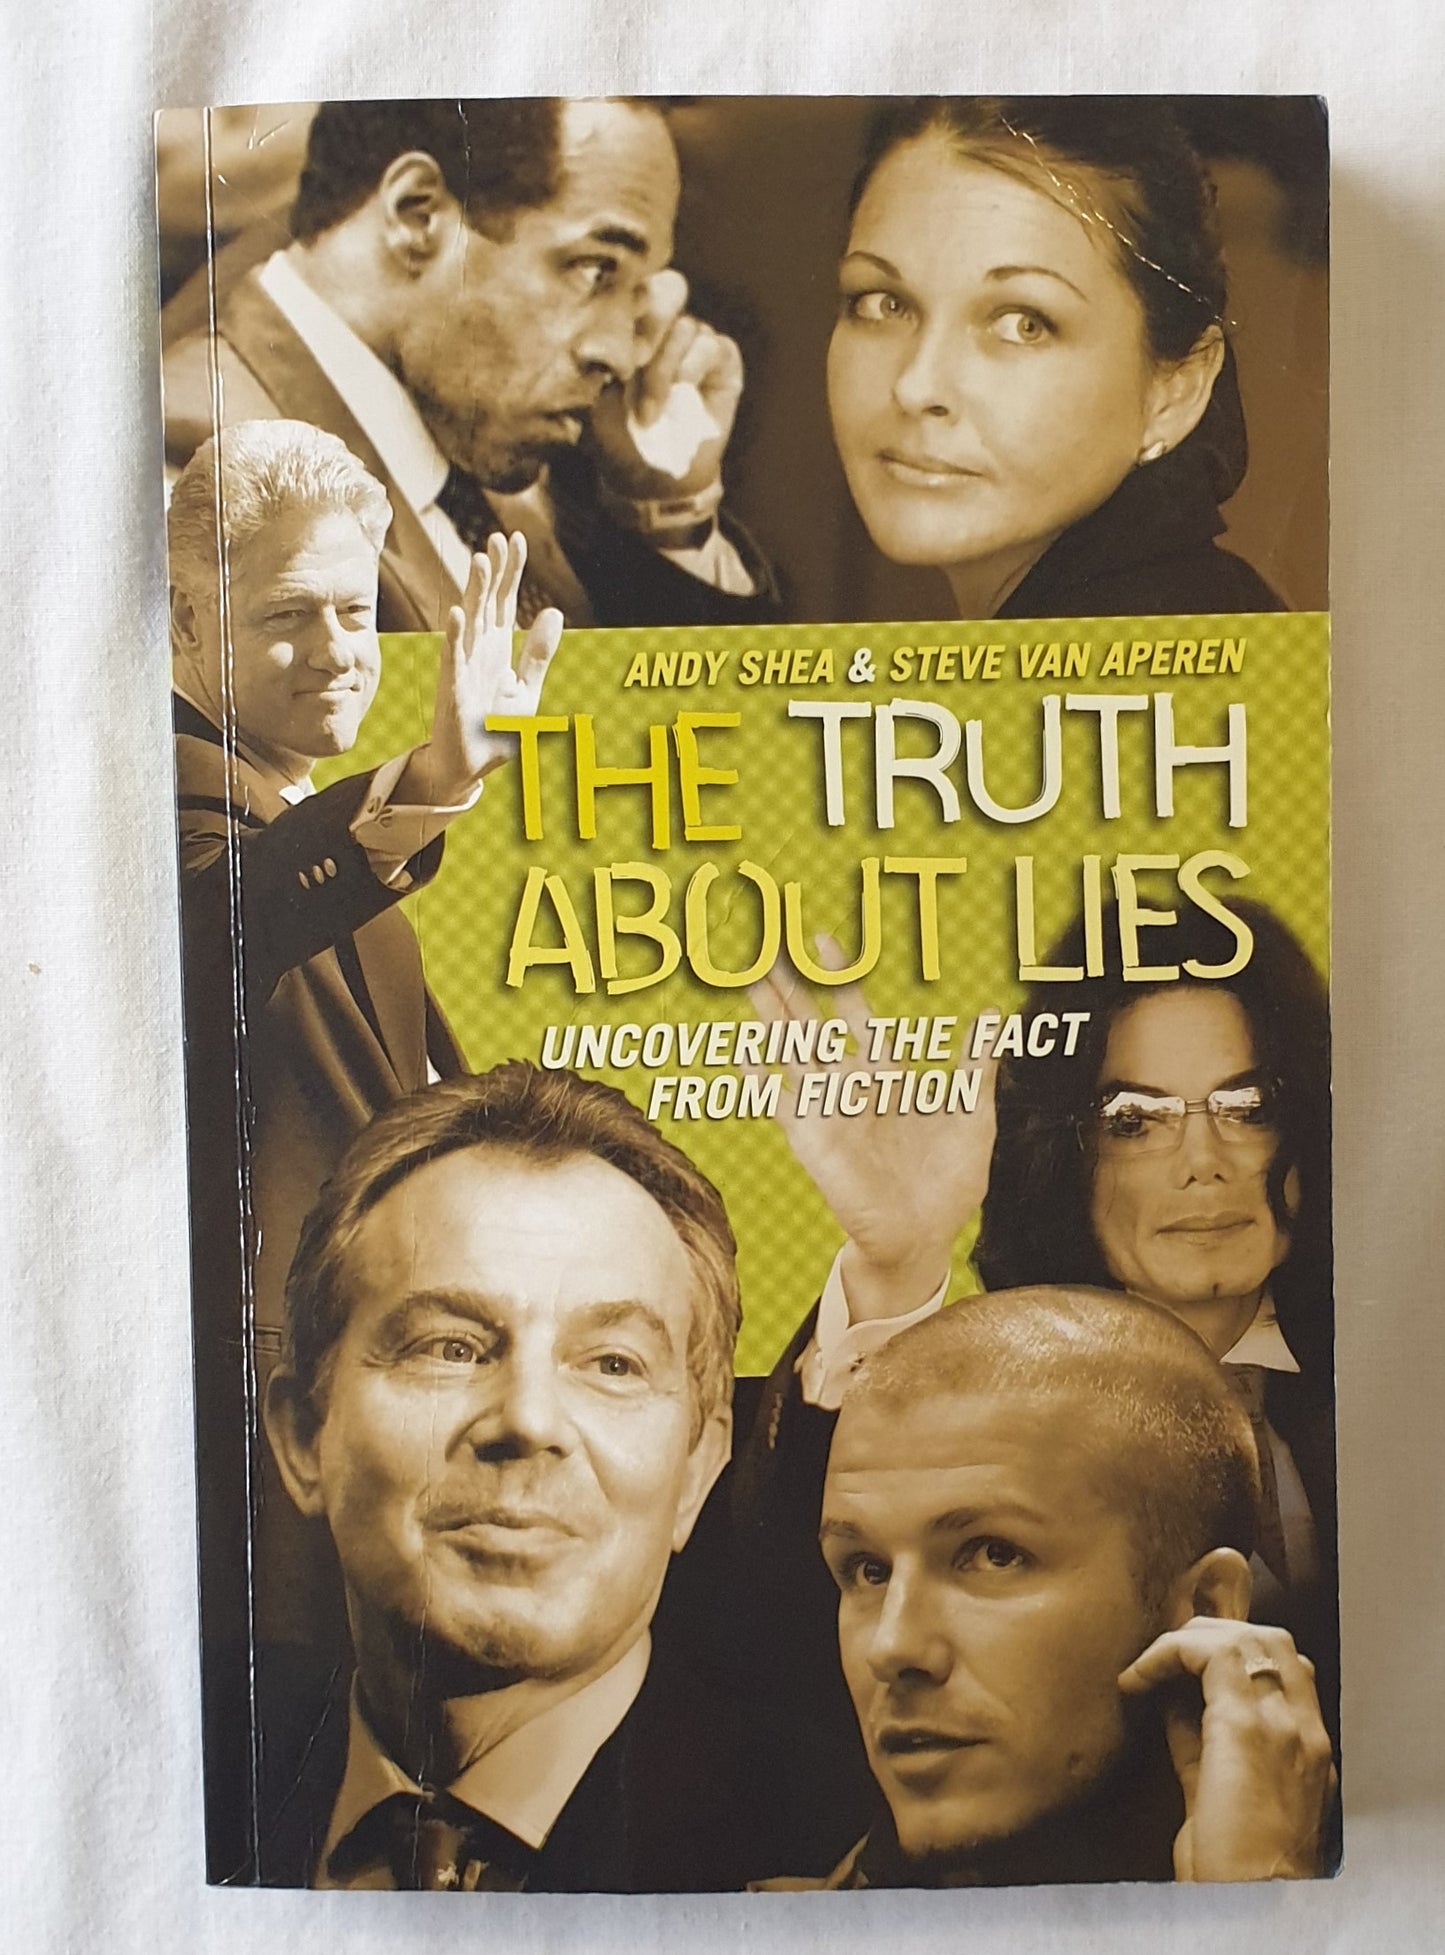 The Truth About Lies by Andy Shea & Steve Van Aperen